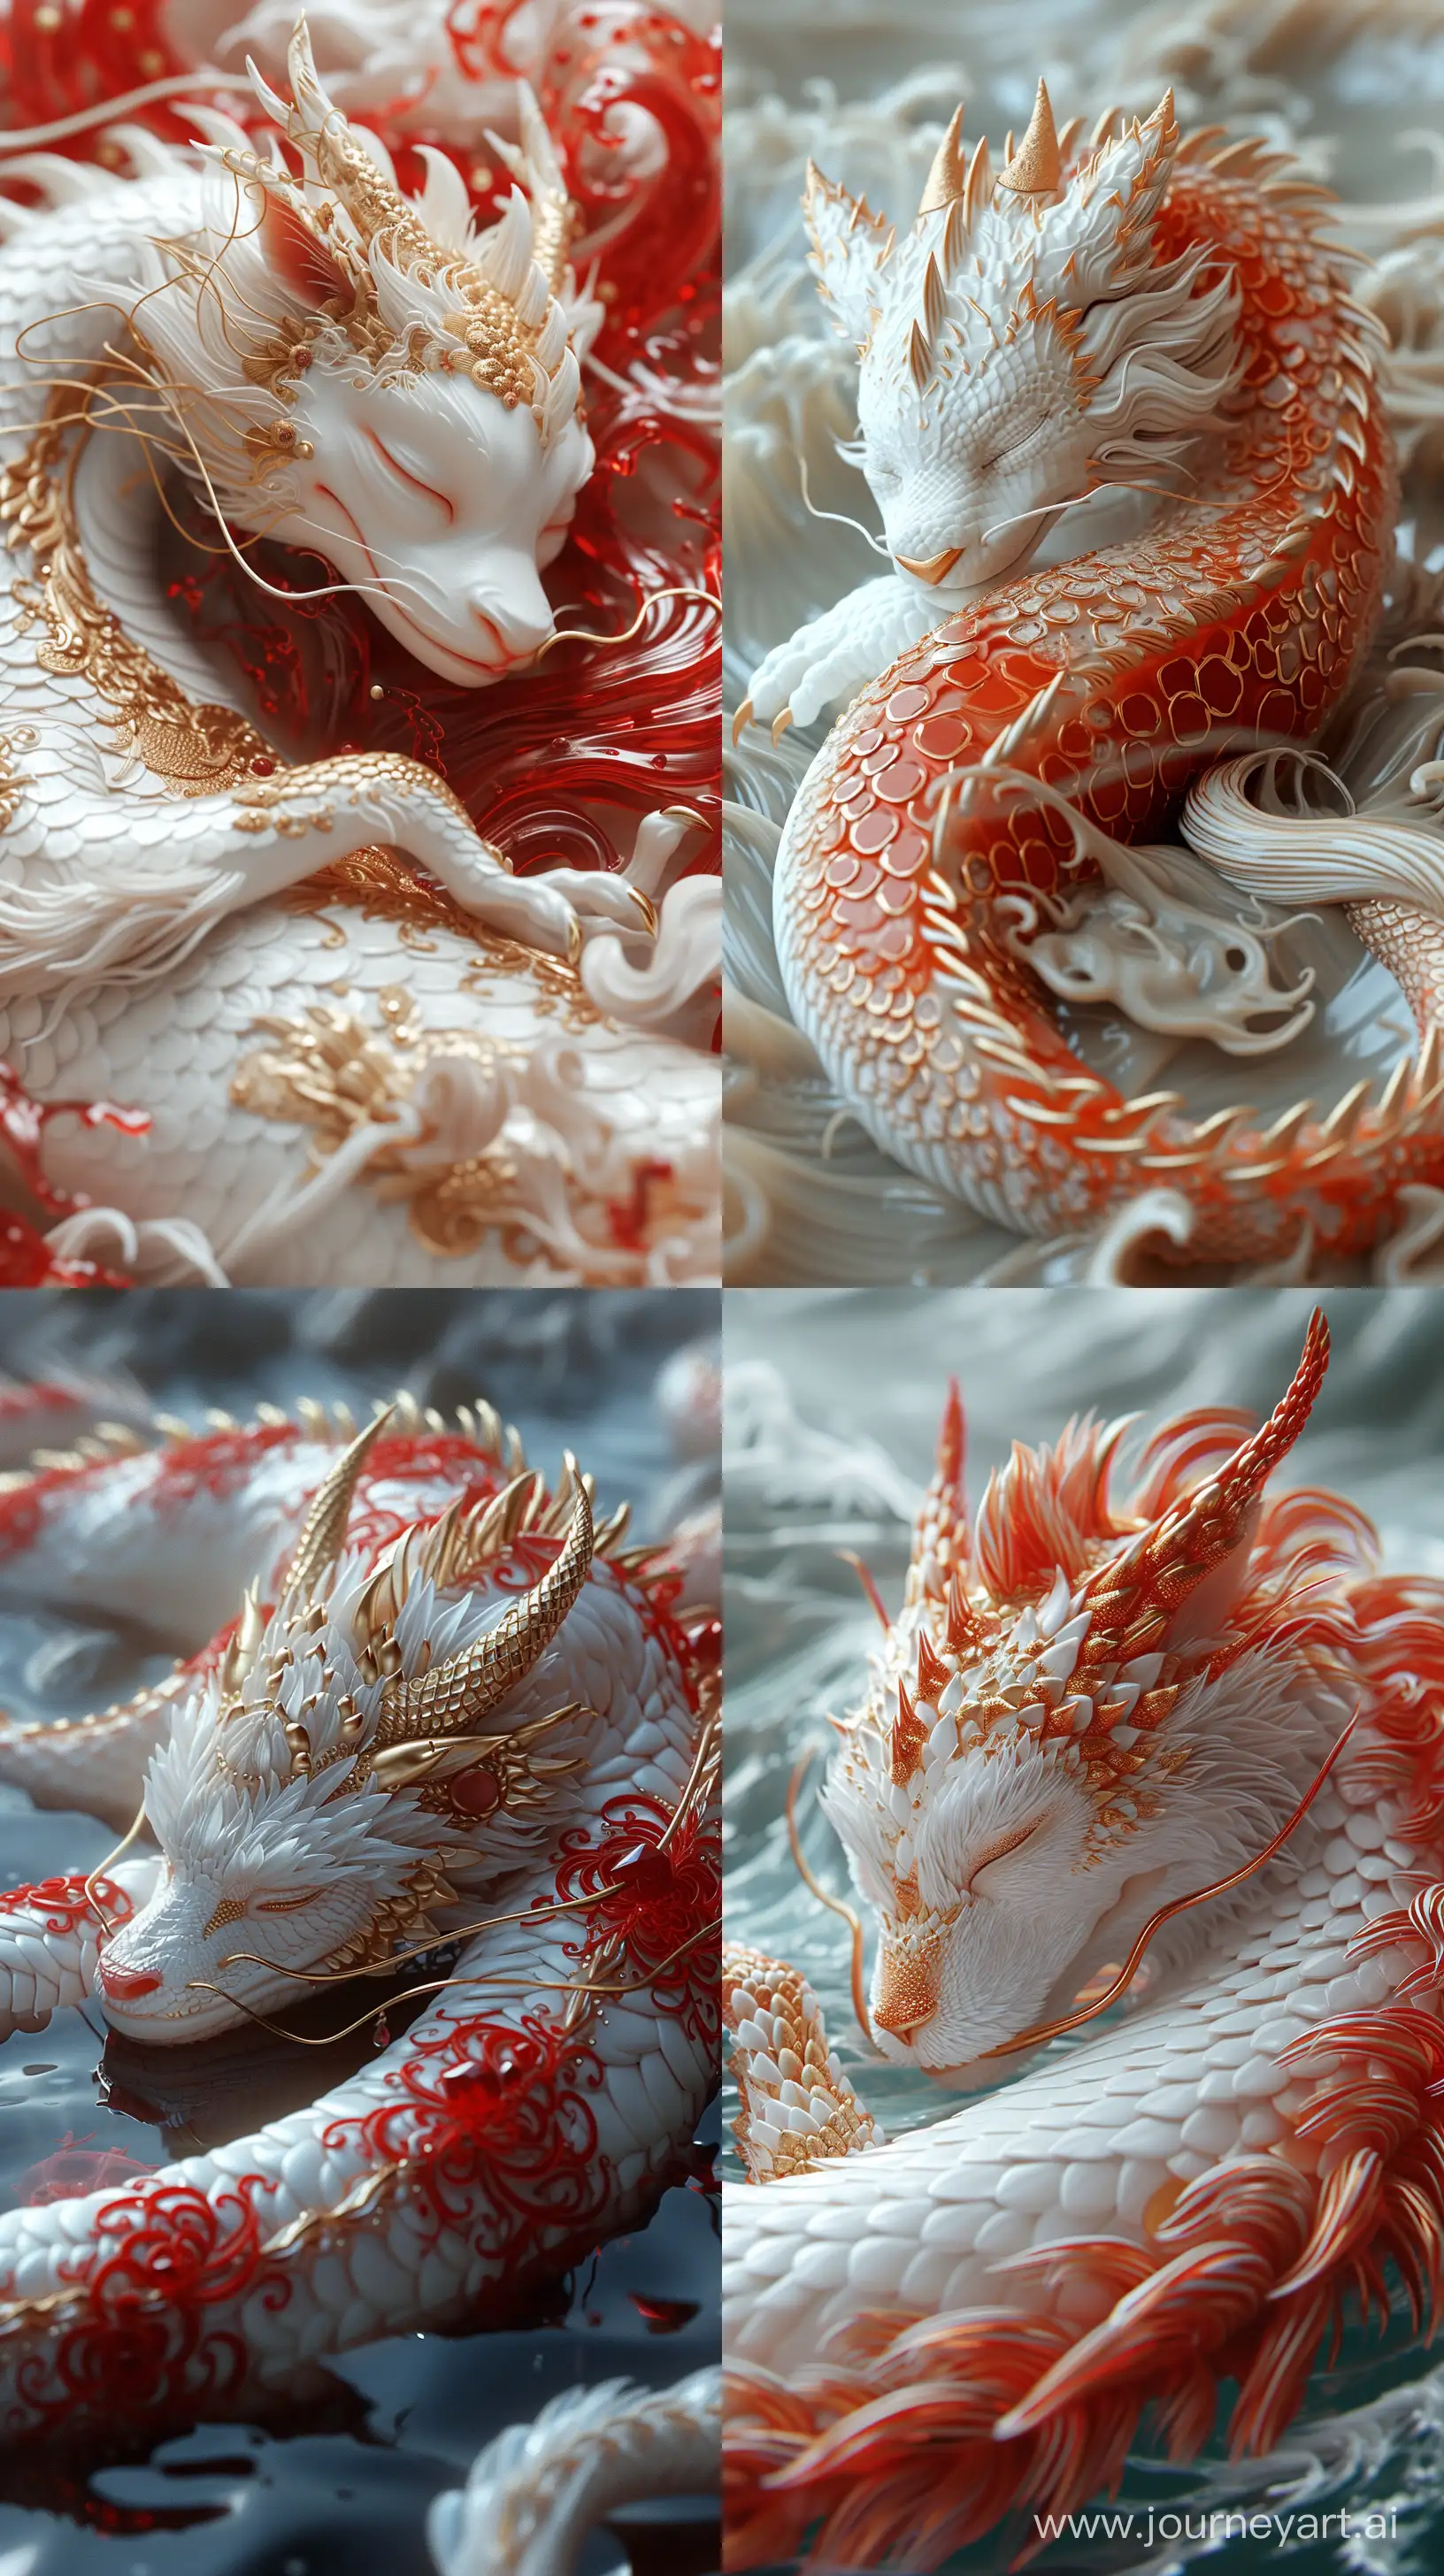 Translucent-Glass-Dragon-Resting-in-Ruby-and-Gold-Seascape